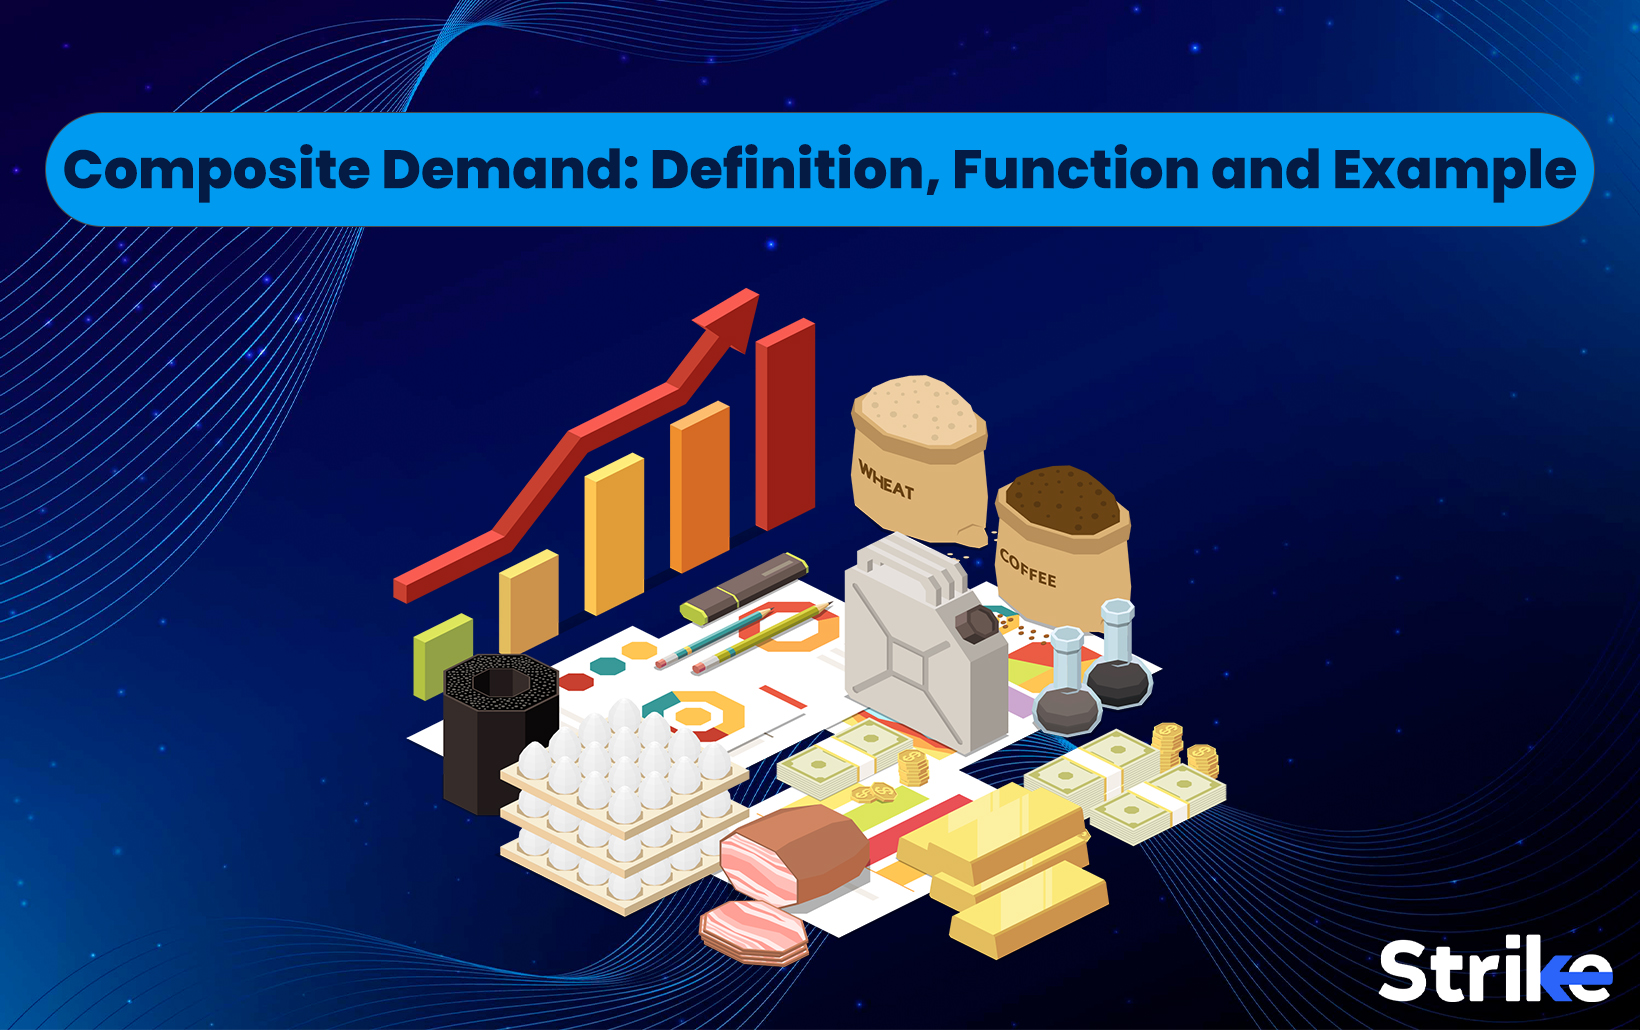 Composite Demand: Definition, Function and Example